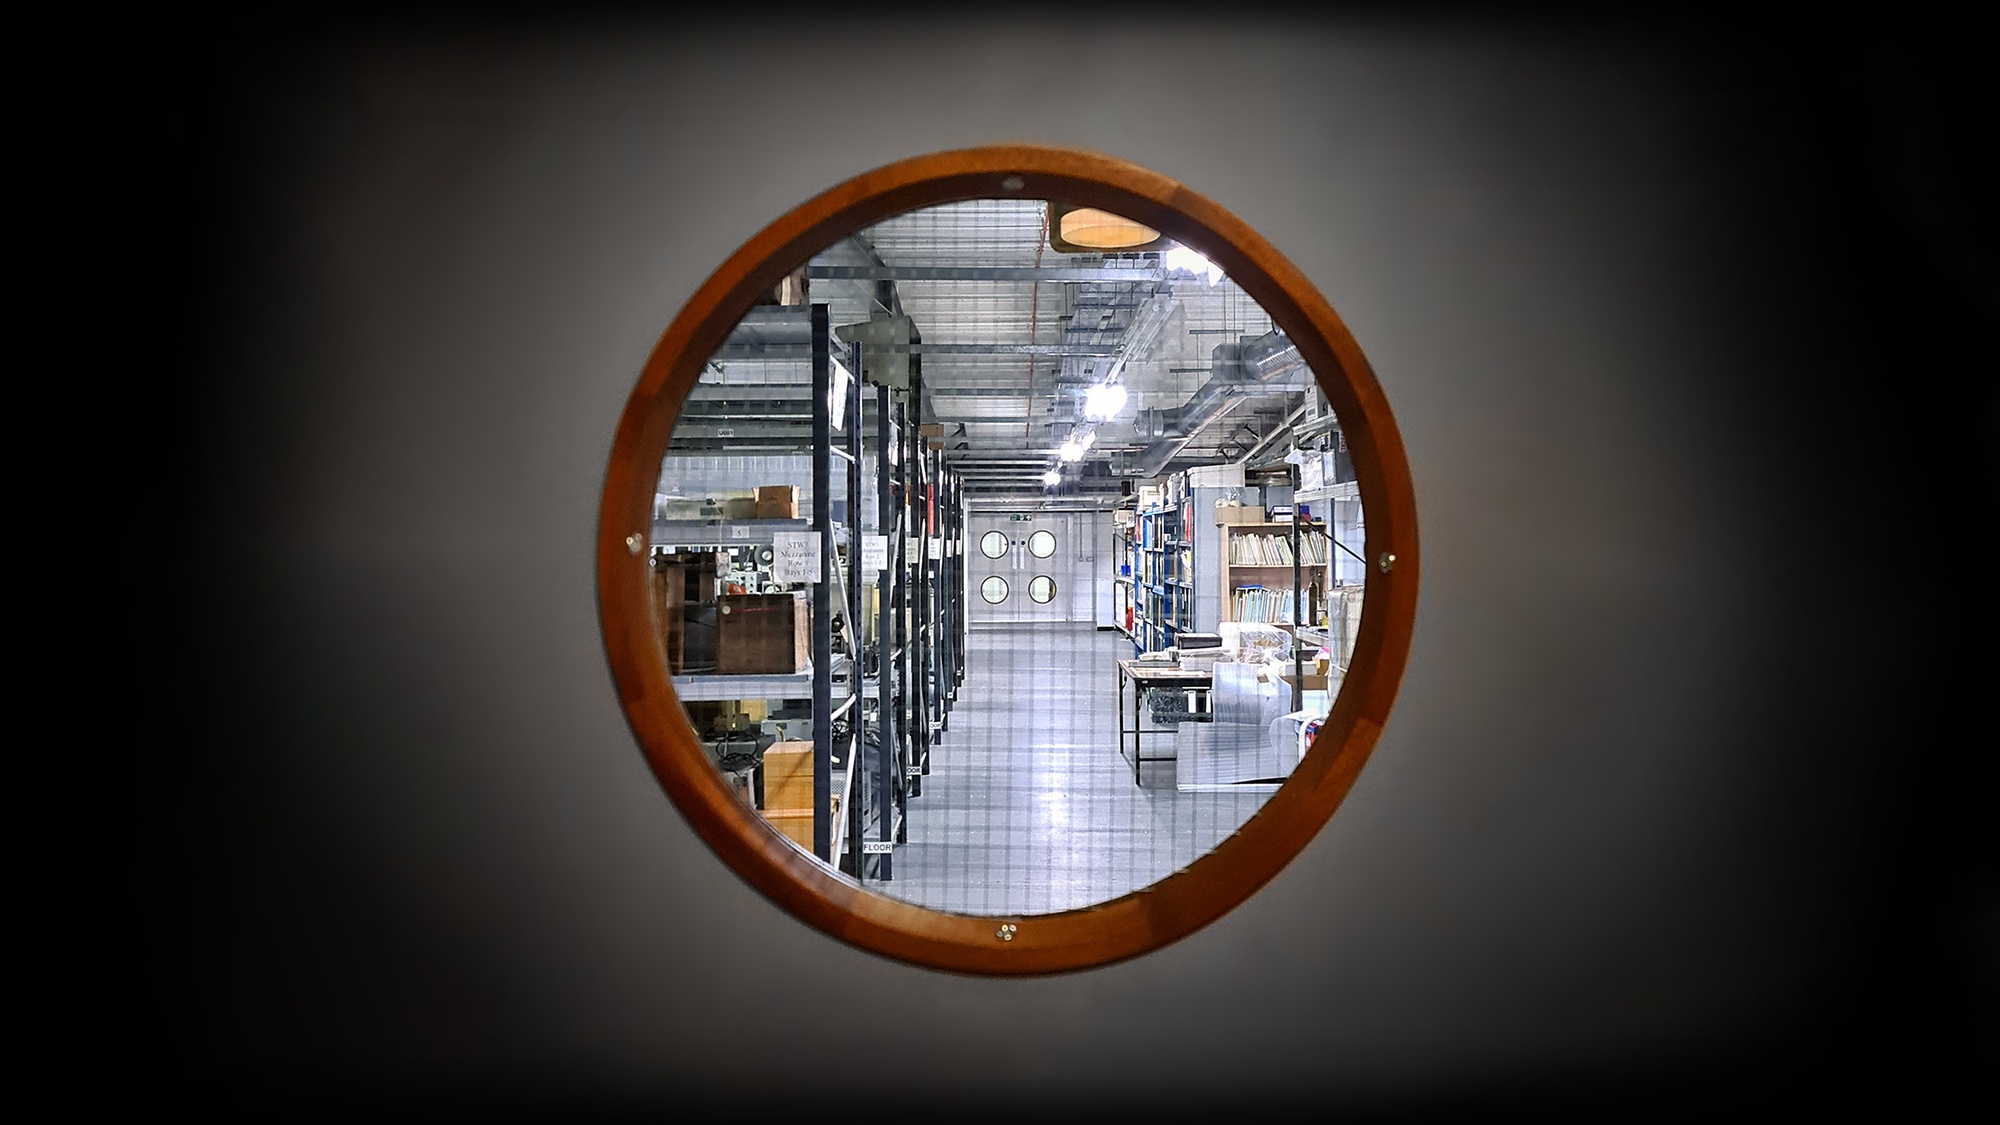 A small circular window, like those you would see in the hull of a ship, gives a glimpse into a museum storage area filled with racks containing boxes and folders.